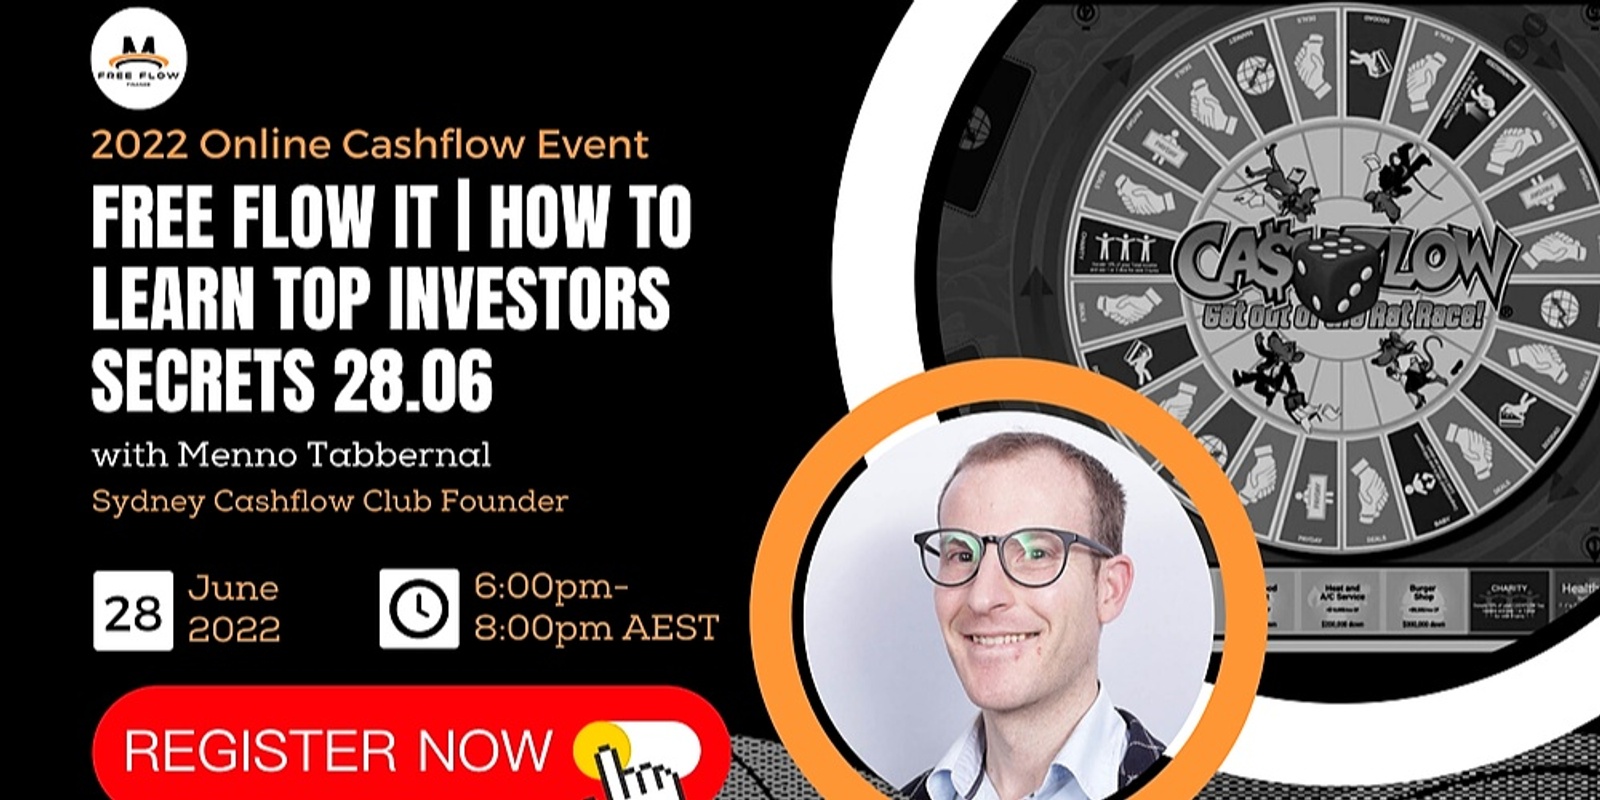 Free Flow It | How To Learn Top Investors Secrets 28.06